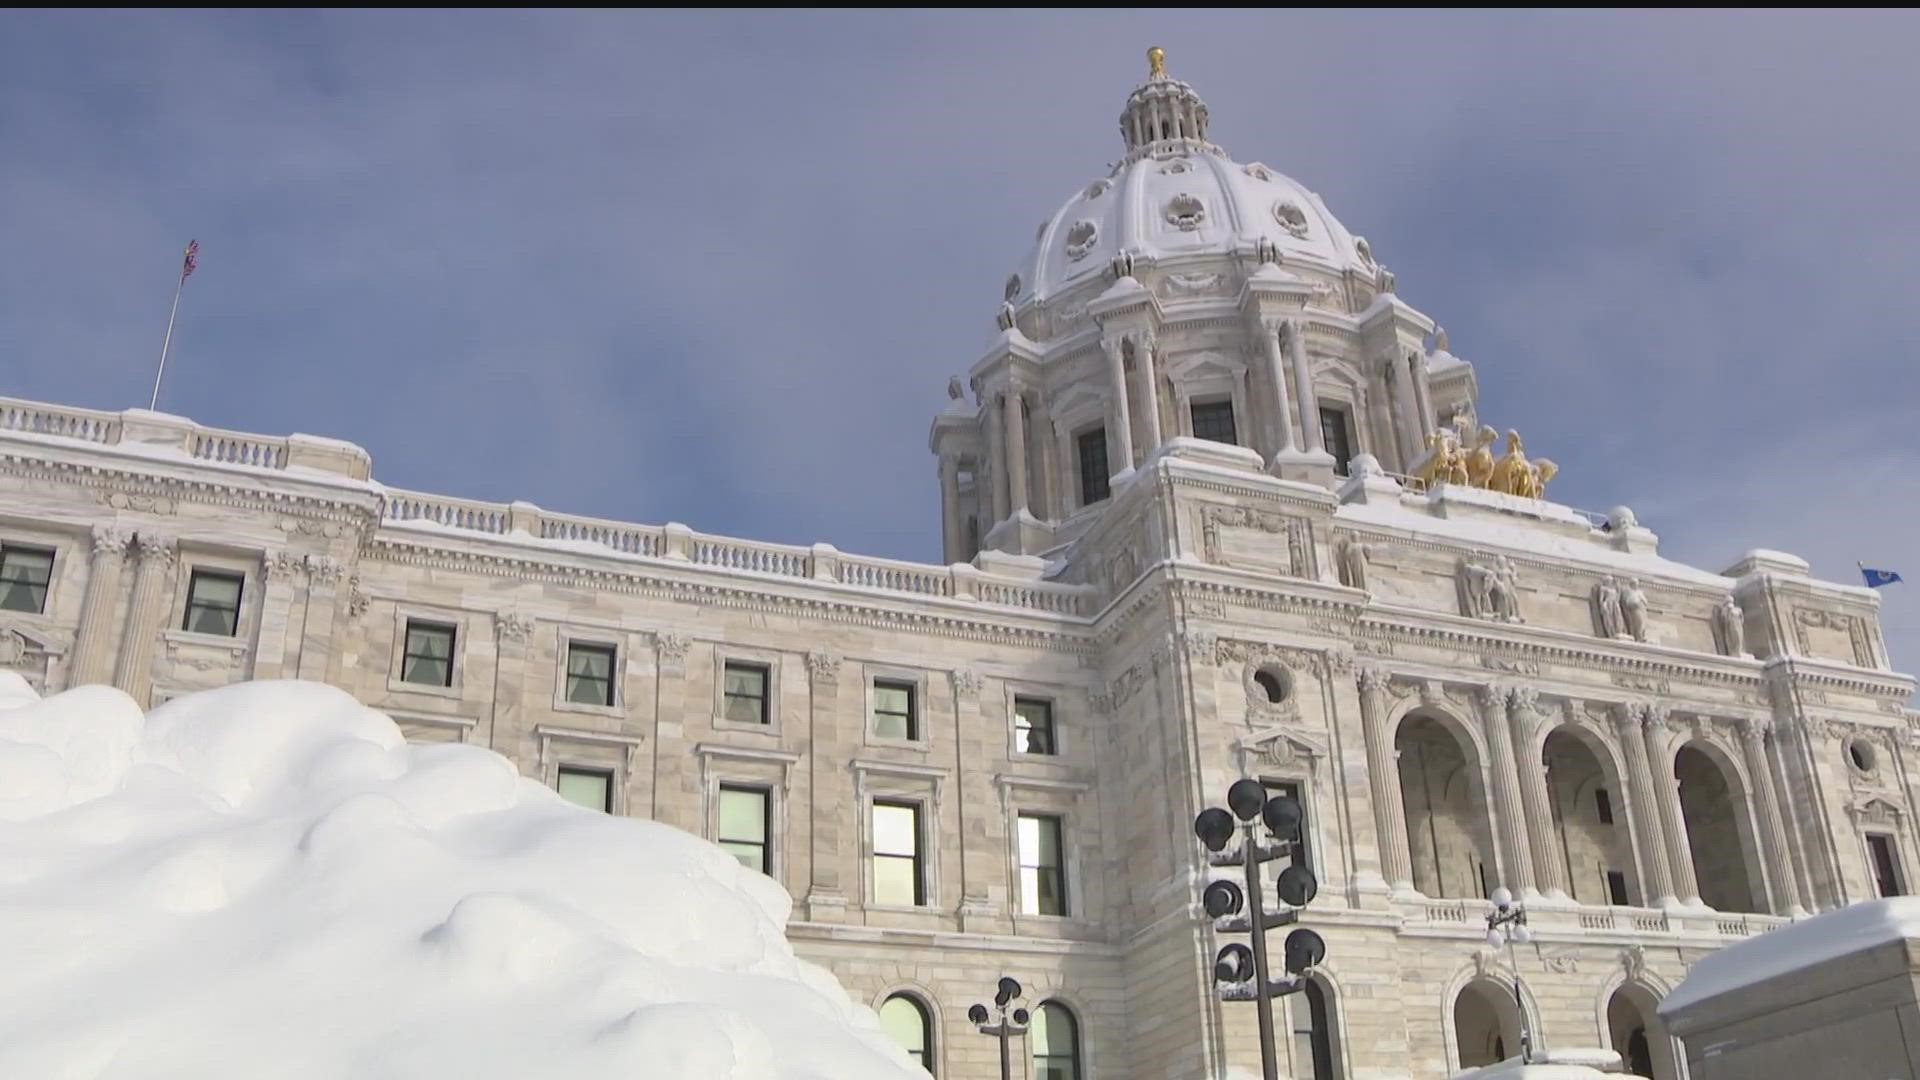 The new projection is the forecast that the Legislature will use to set the next two-year budget, which takes effect in July. By law, it must be balanced.